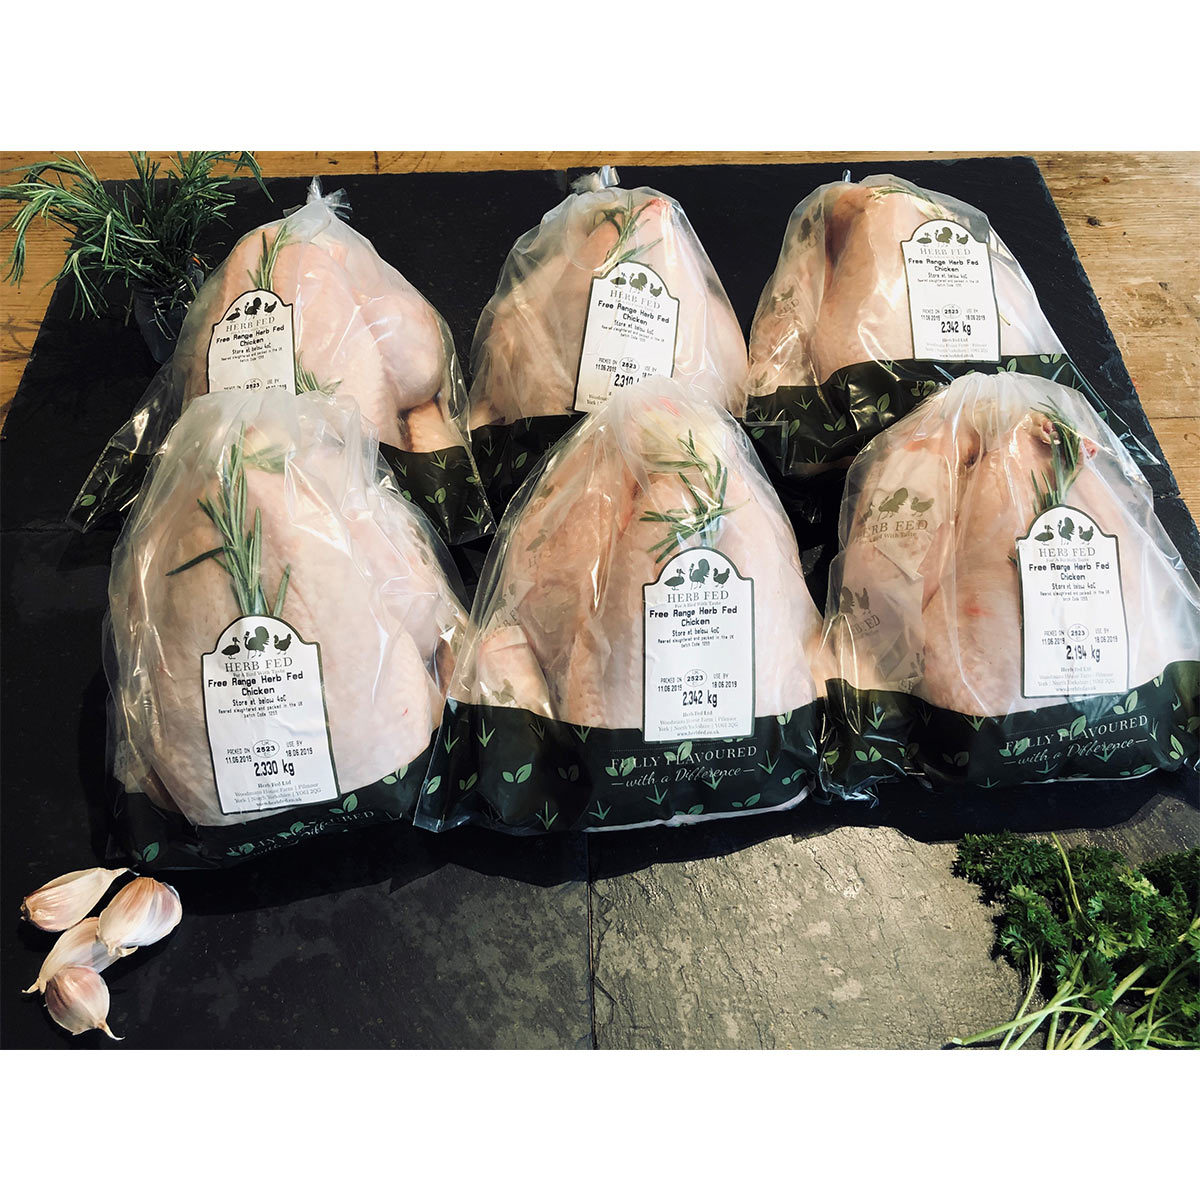 Herb Fed Free Range Whole Chickens, 6 x 2.2kg in Packaging